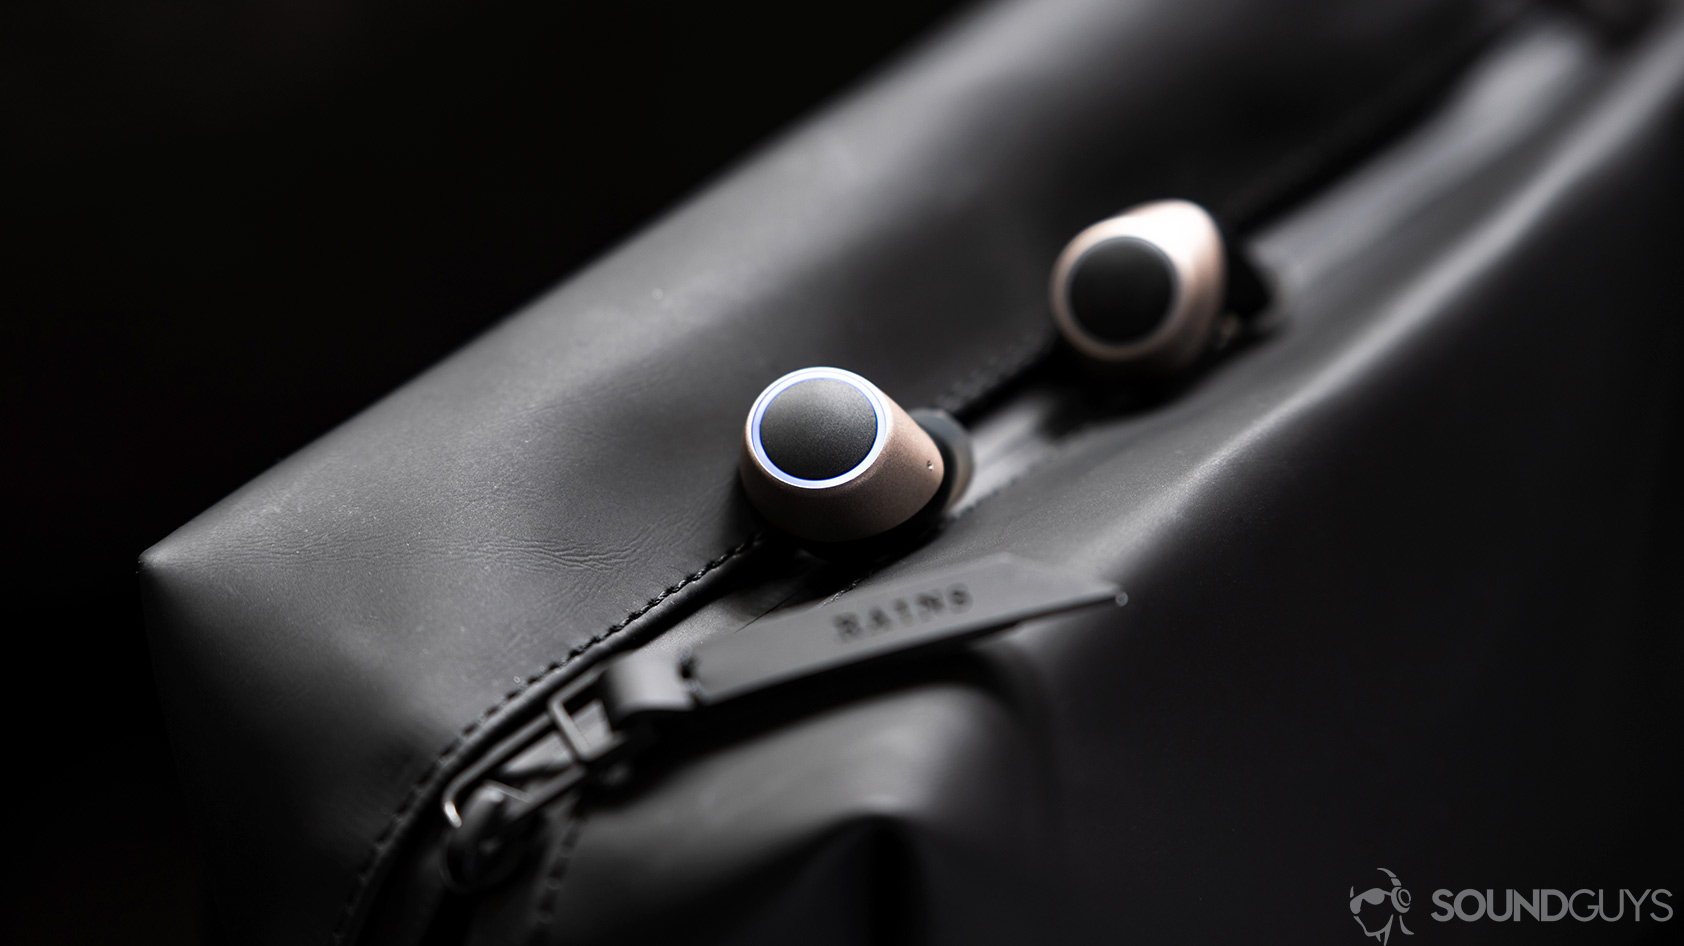 The Creative Outlier Air earbuds in champagne gold on a black waterproof bag.